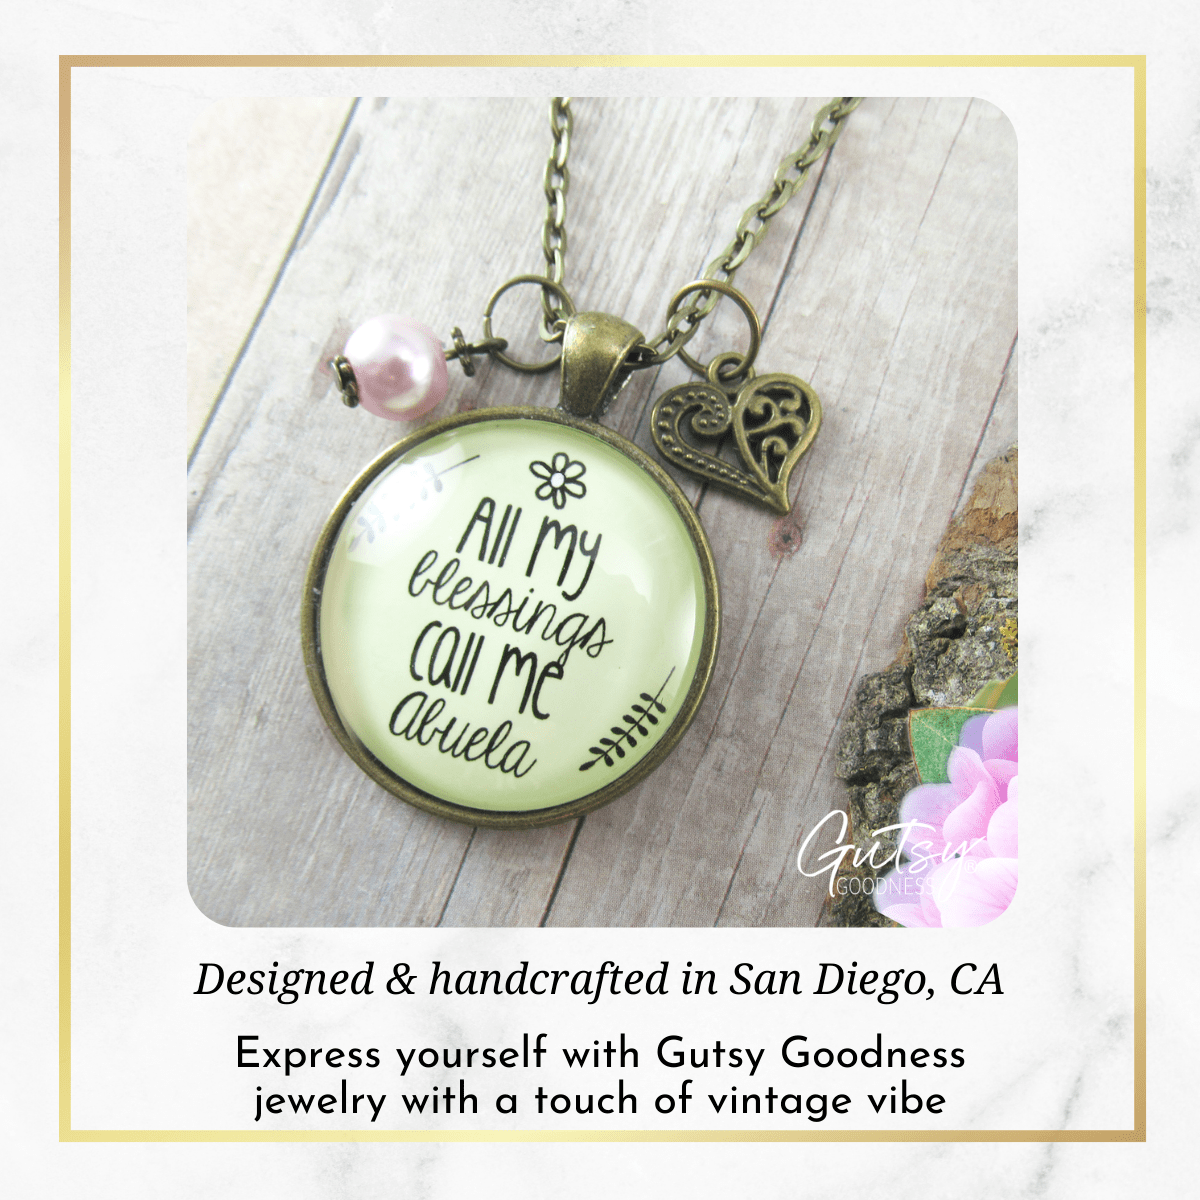 Gutsy Goodness Abuela Necklace All My Blessings Spanish Grandma Family Heart Gift Jewelry - Gutsy Goodness;Abuela Necklace All My Blessings Spanish Grandma Family Heart Gift Jewelry - Gutsy Goodness Handmade Jewelry Gifts